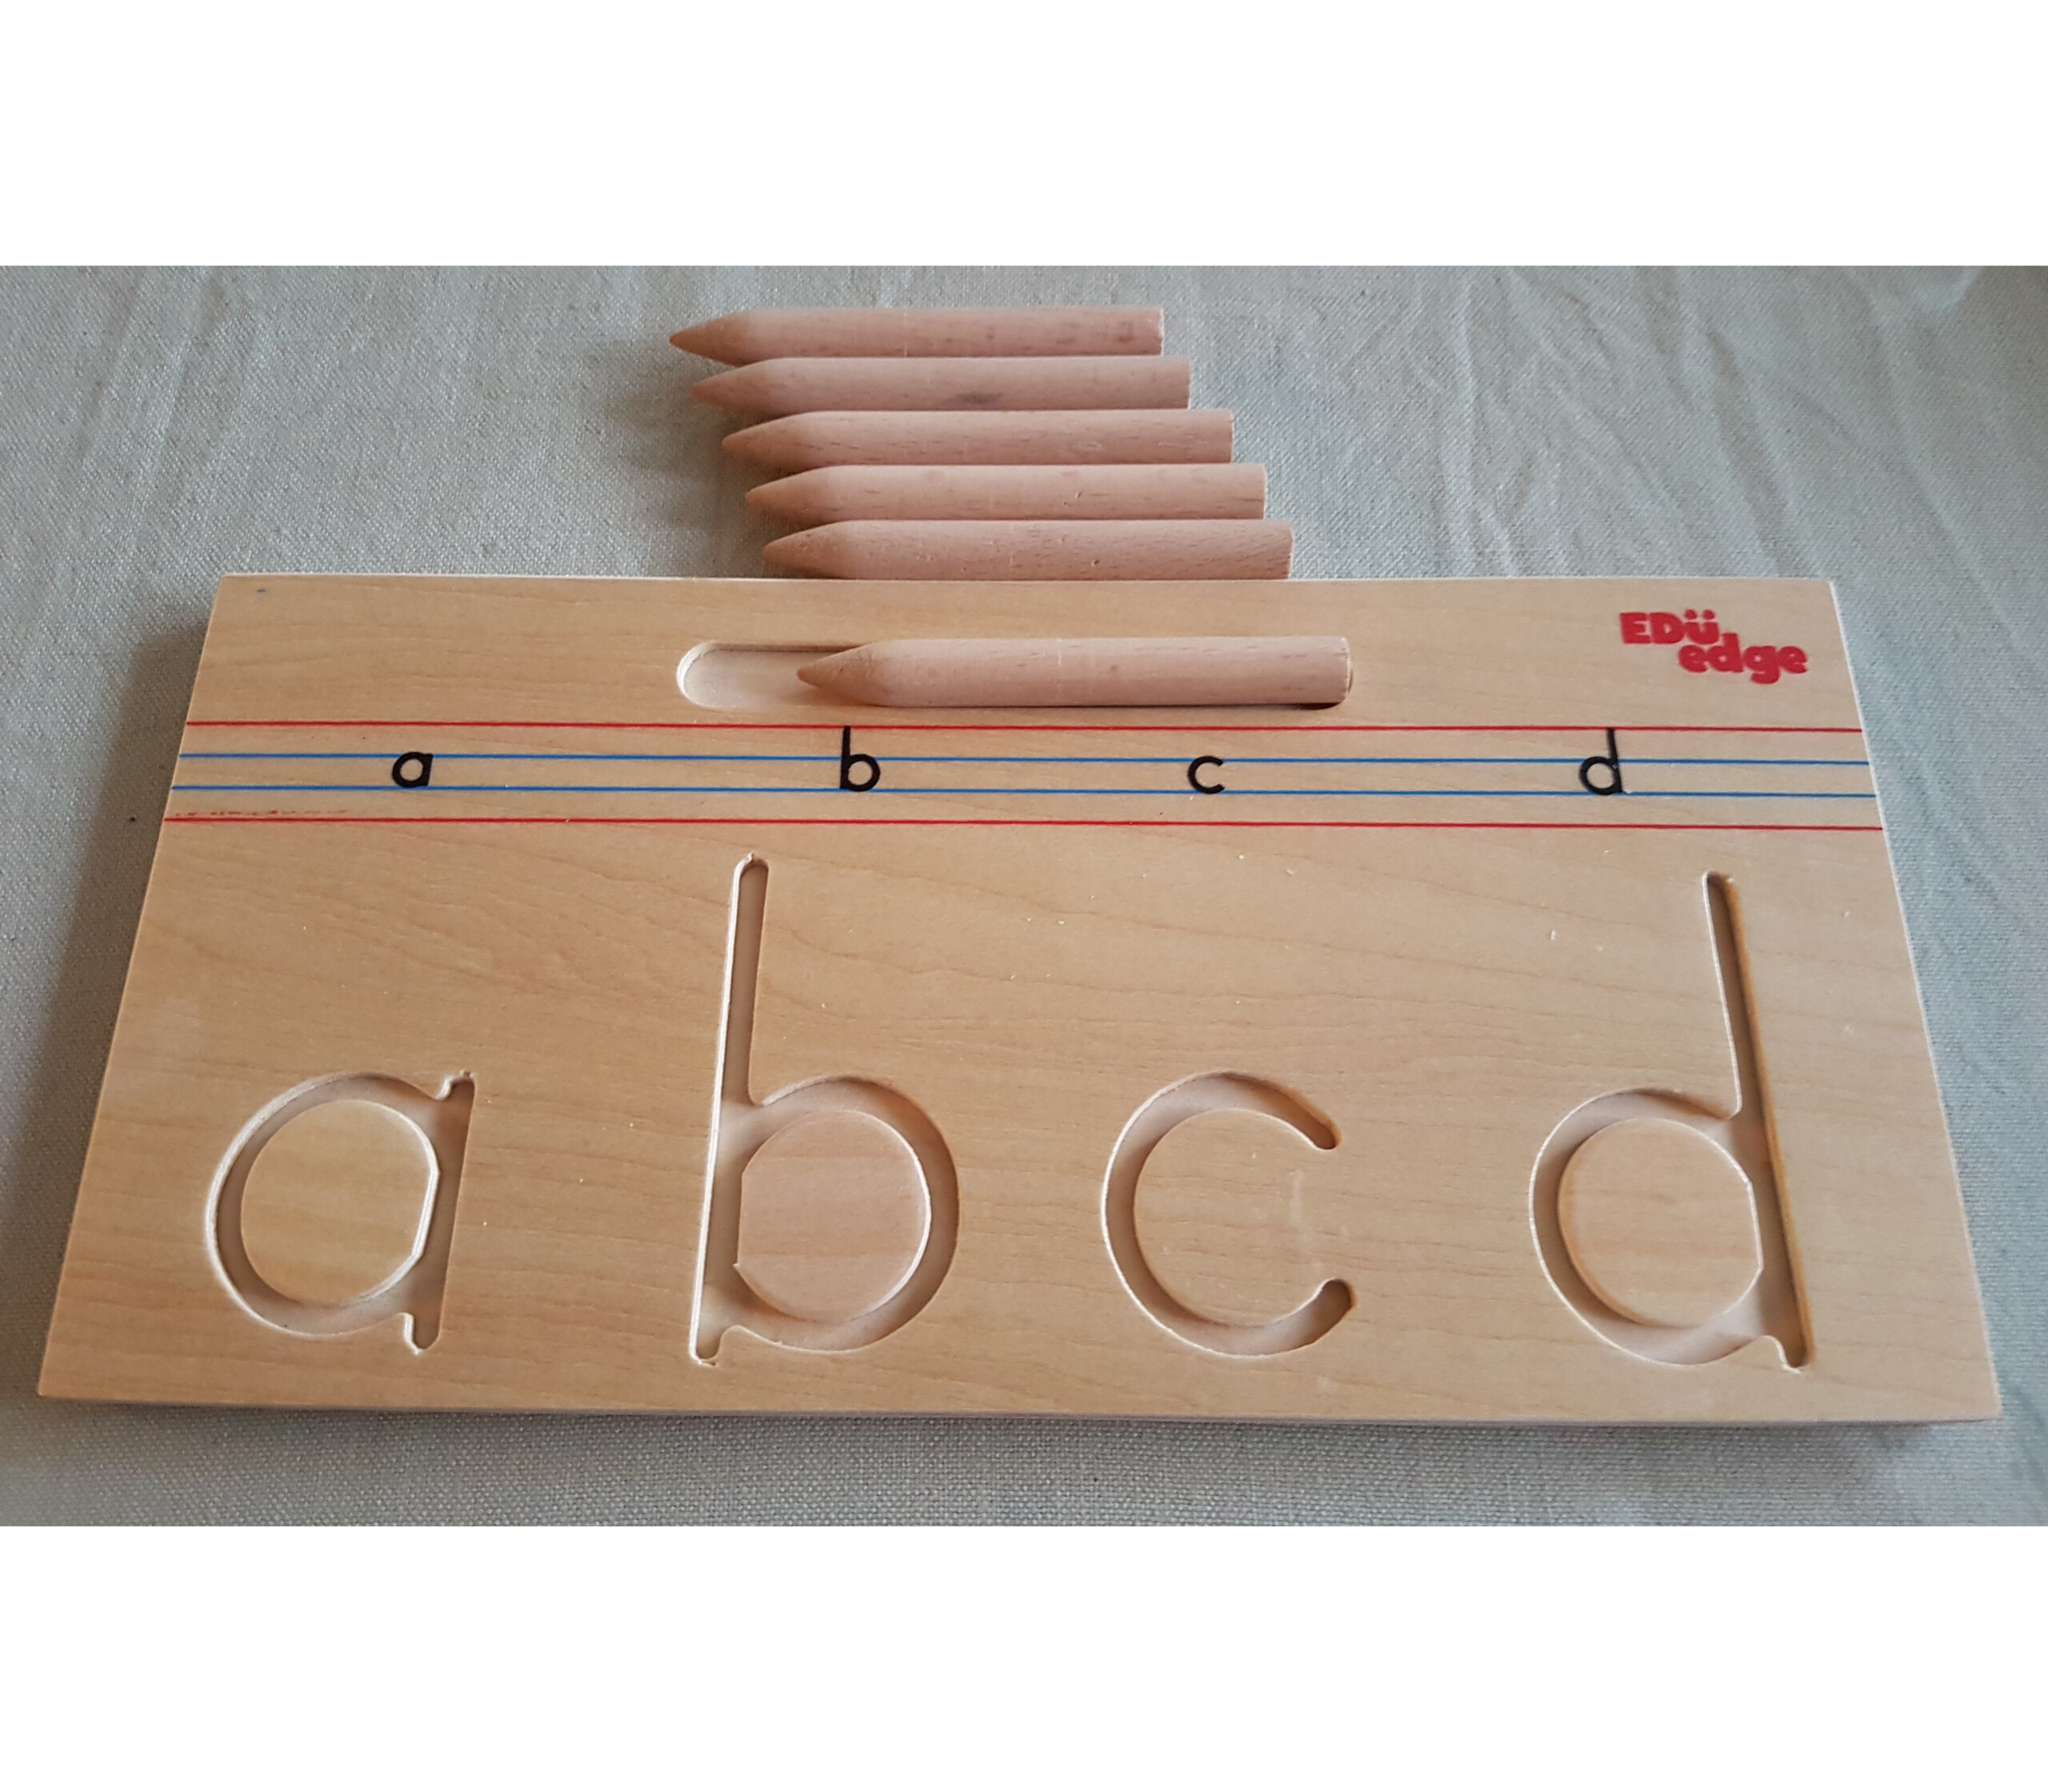 Wooden Alphabet Tracing - Lowercase A-Z Tracing Boards - Pre Writing Skills